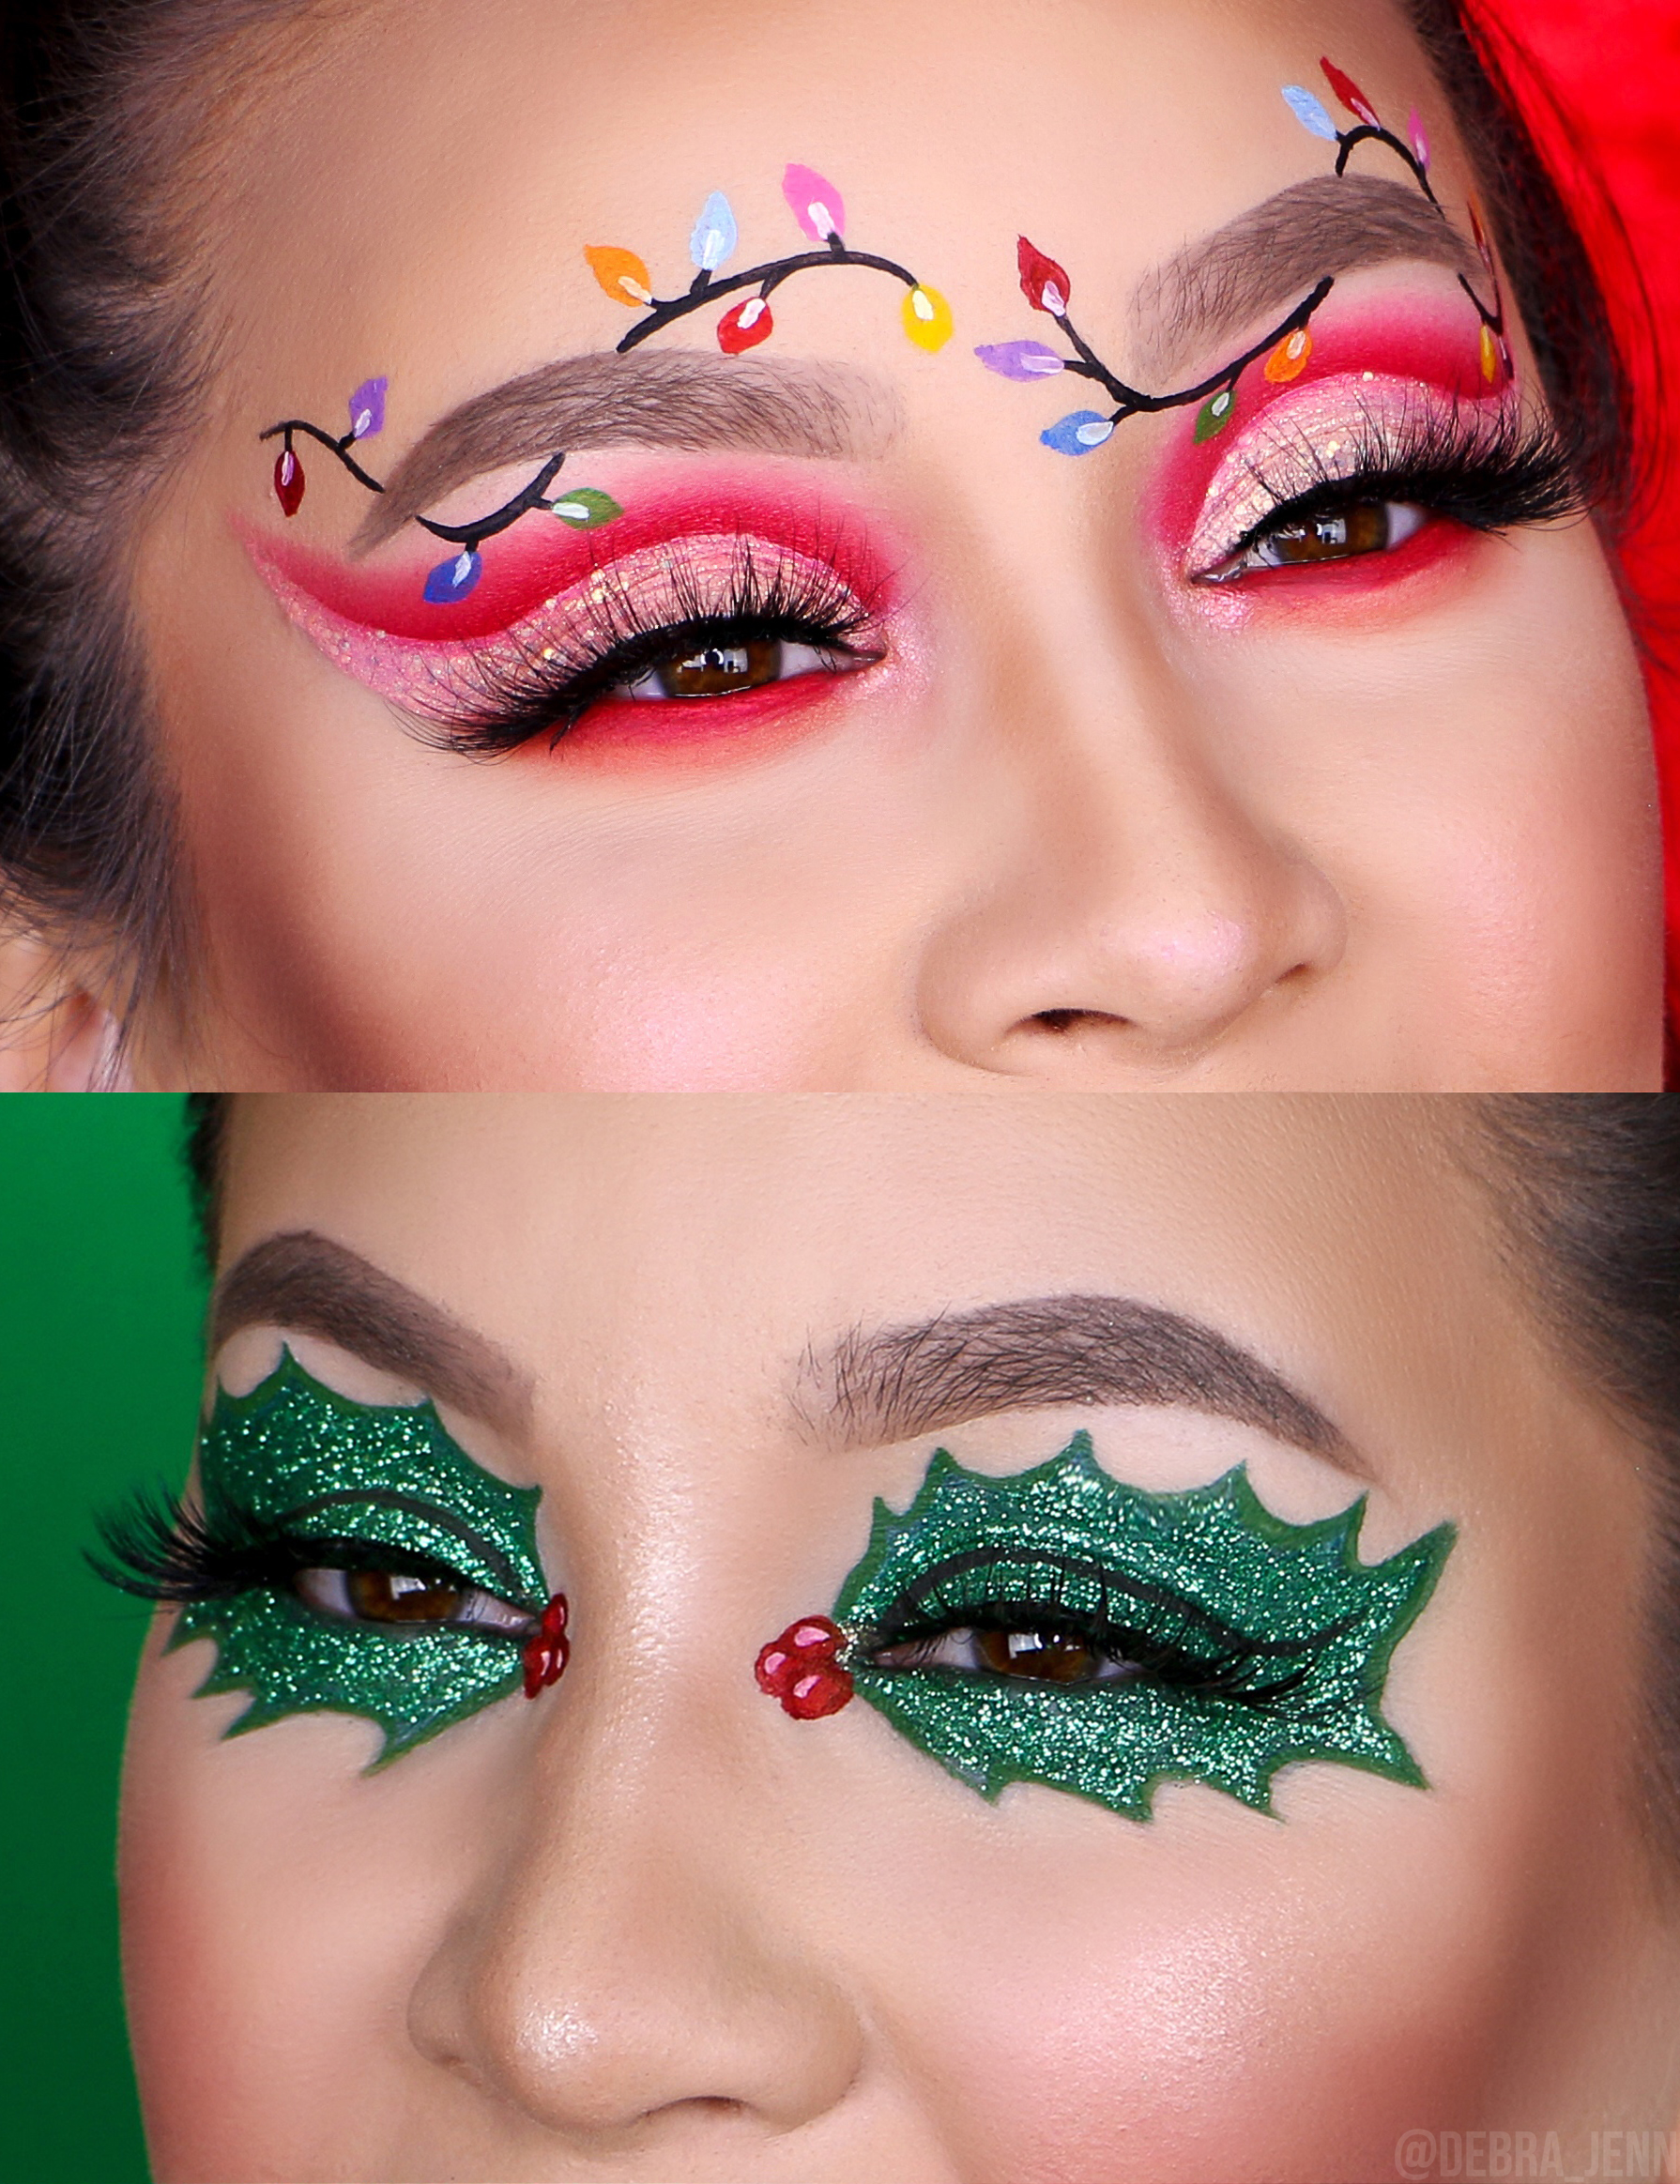 Adorable Makeup Looks You'll Want to Wear on Christmas Day